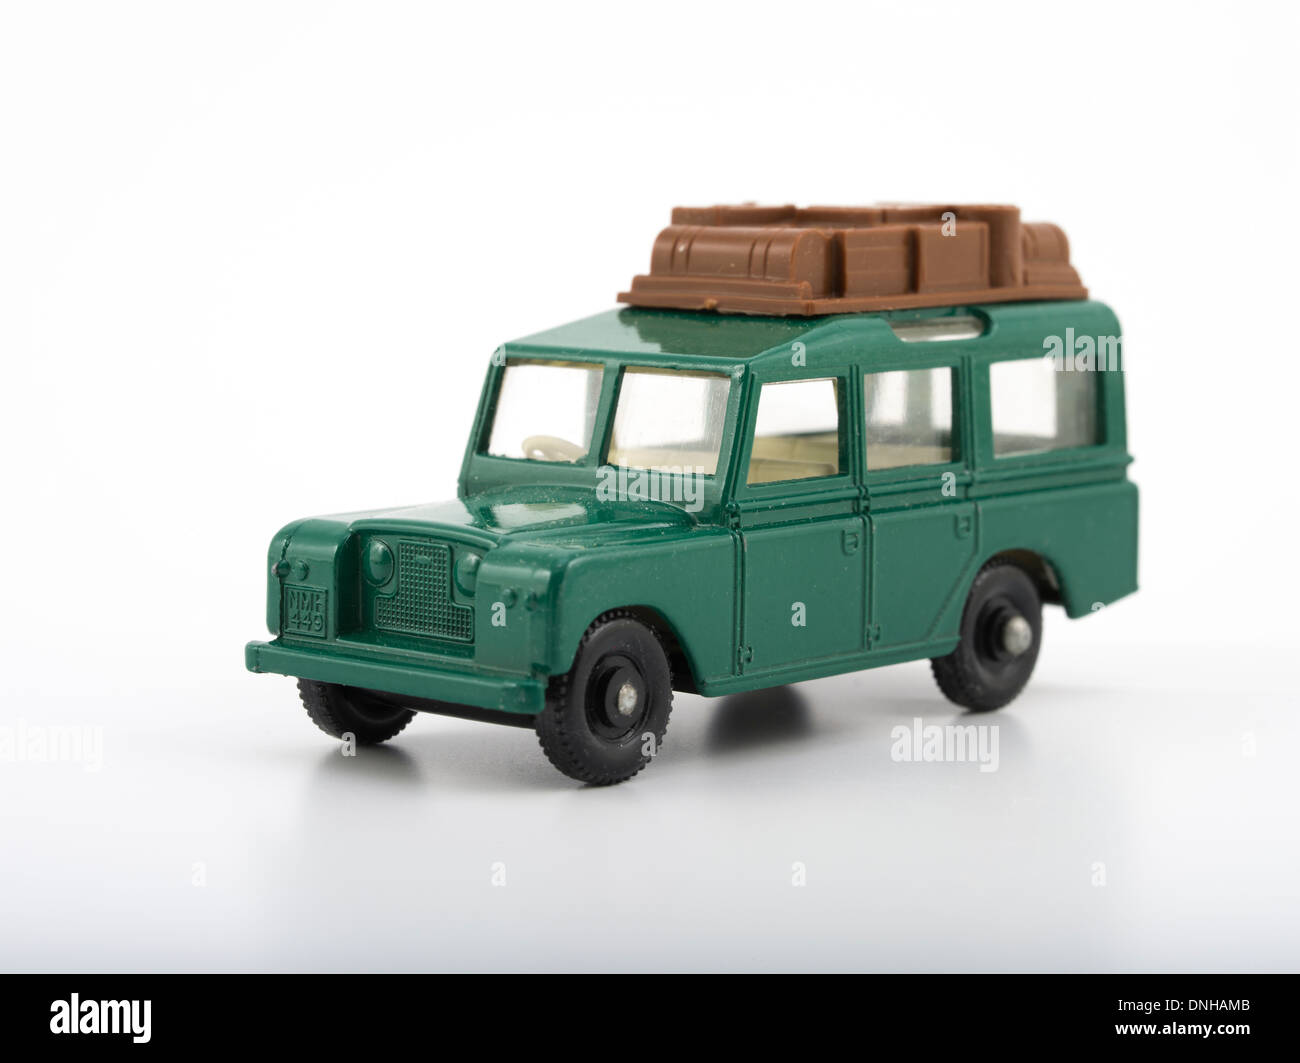 Matchbox Die-cast Toy Cars - #12 Land Rover Safari Produced by Lesney Products United Kingdom from 1953 onwards. Stock Photo